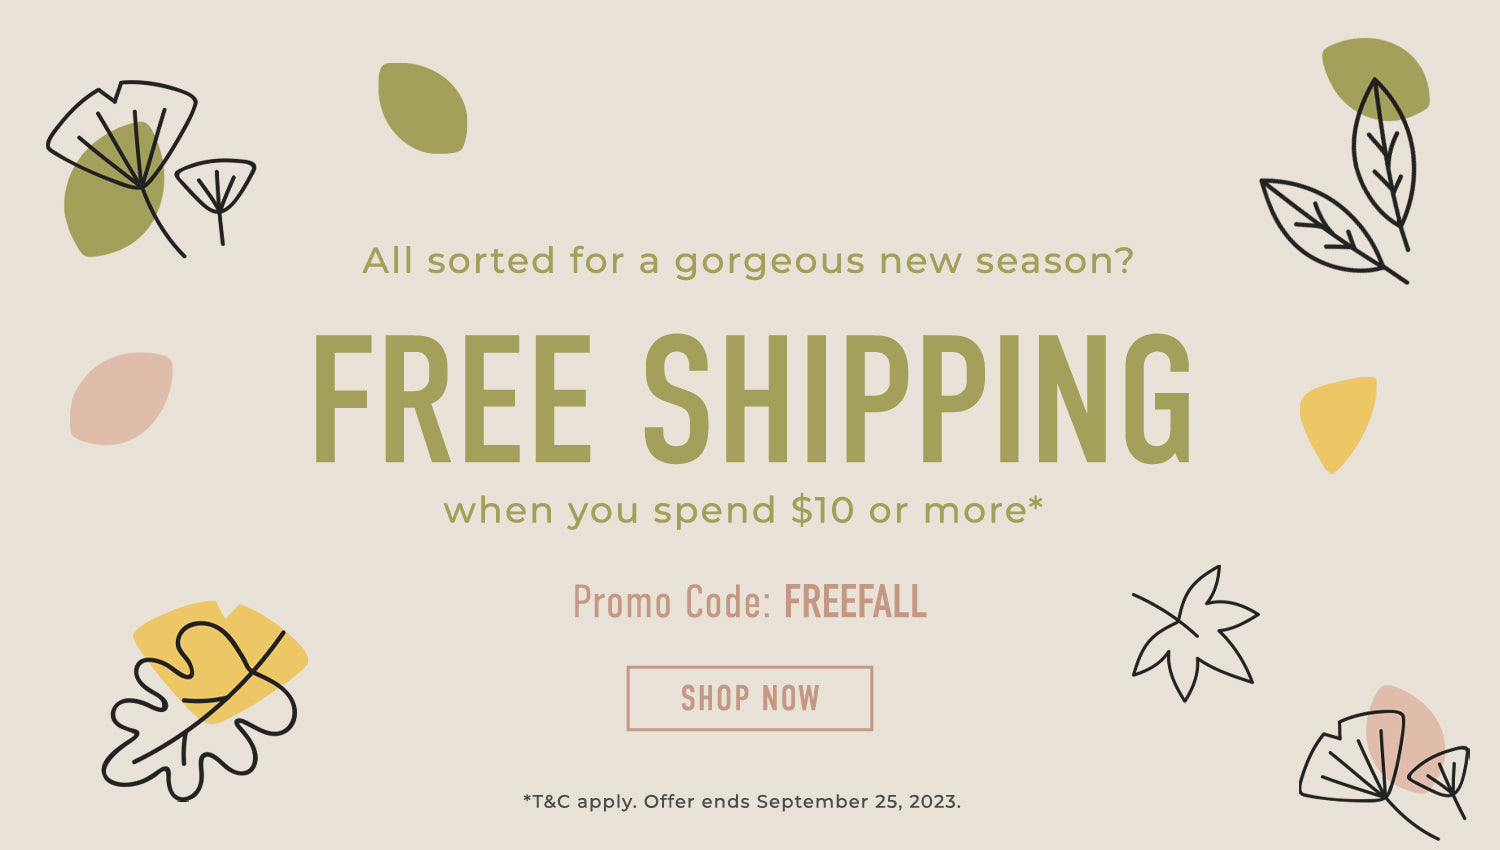 Free Shipping when you spend $10 or more with code: FREEFALL